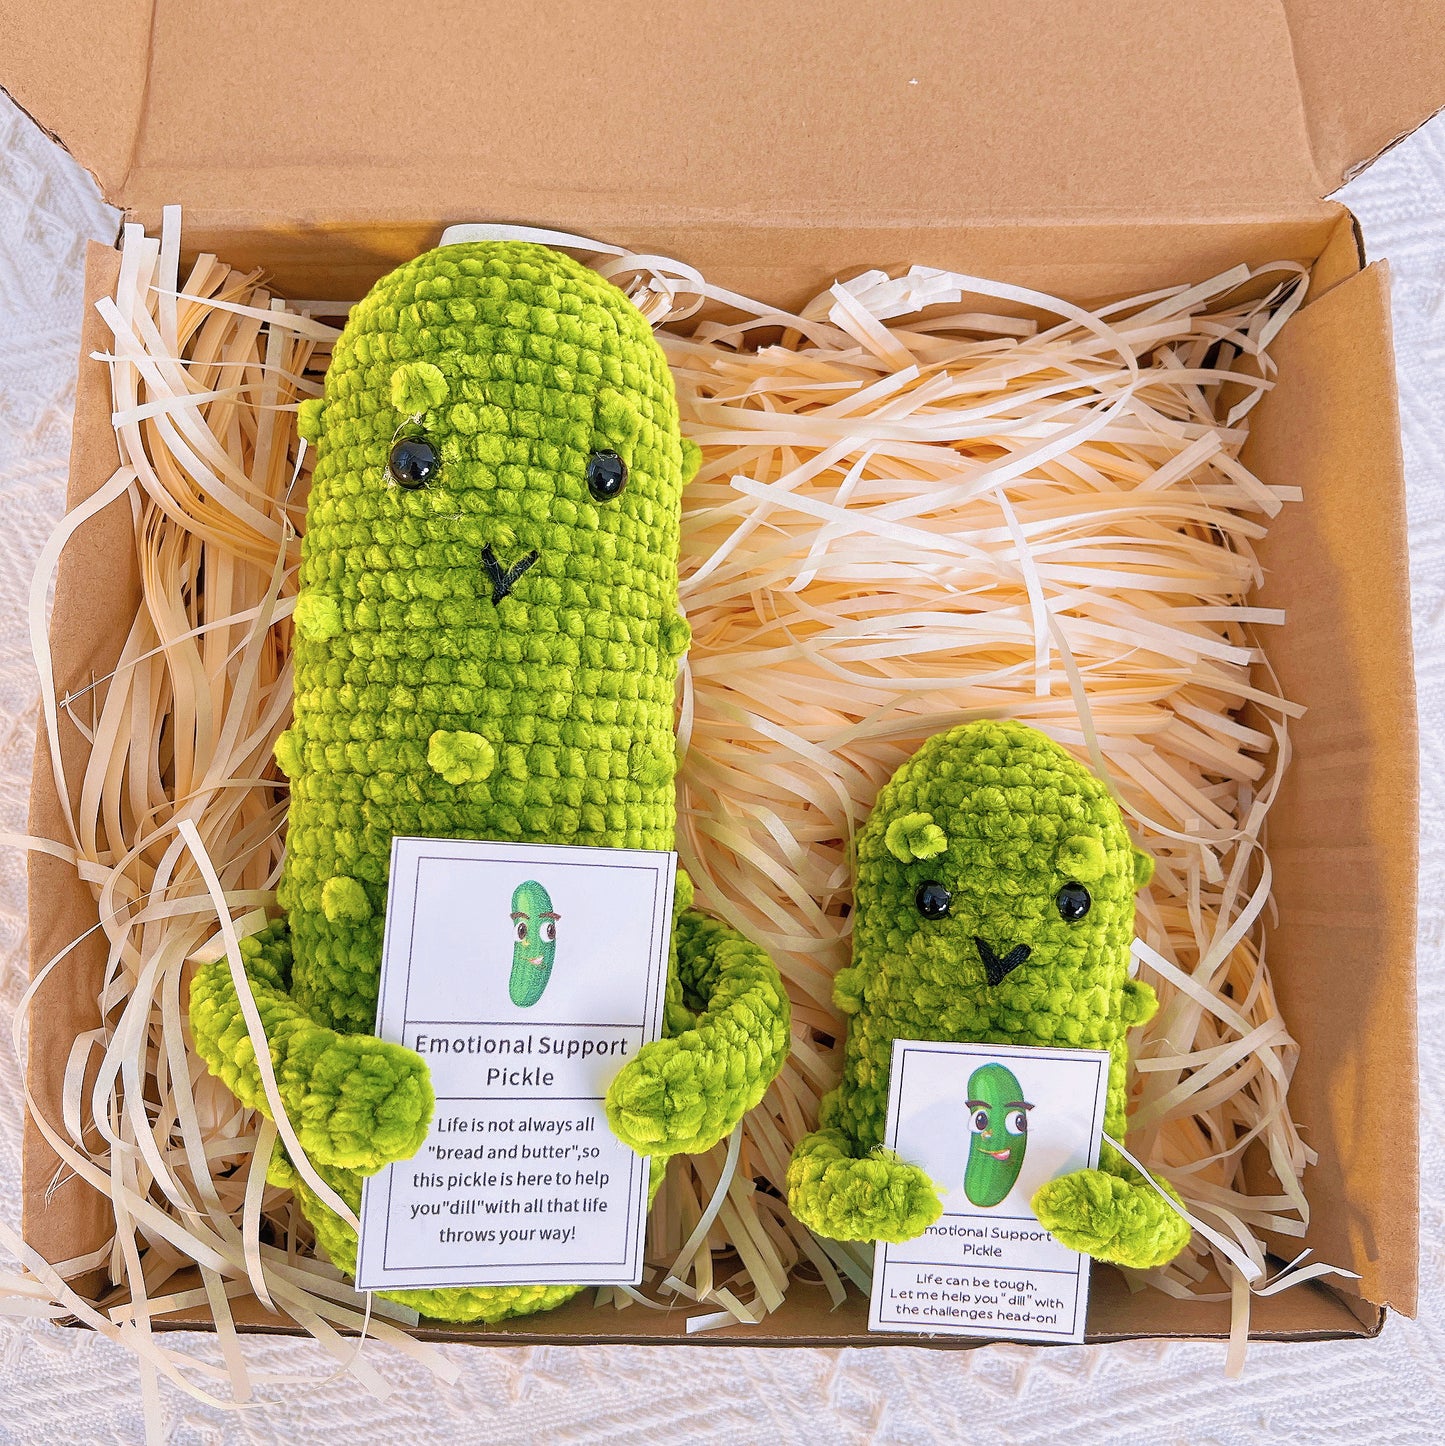 Buy Handmade Funny Positive Pickle Crochet Pickle Stuffed Crafts